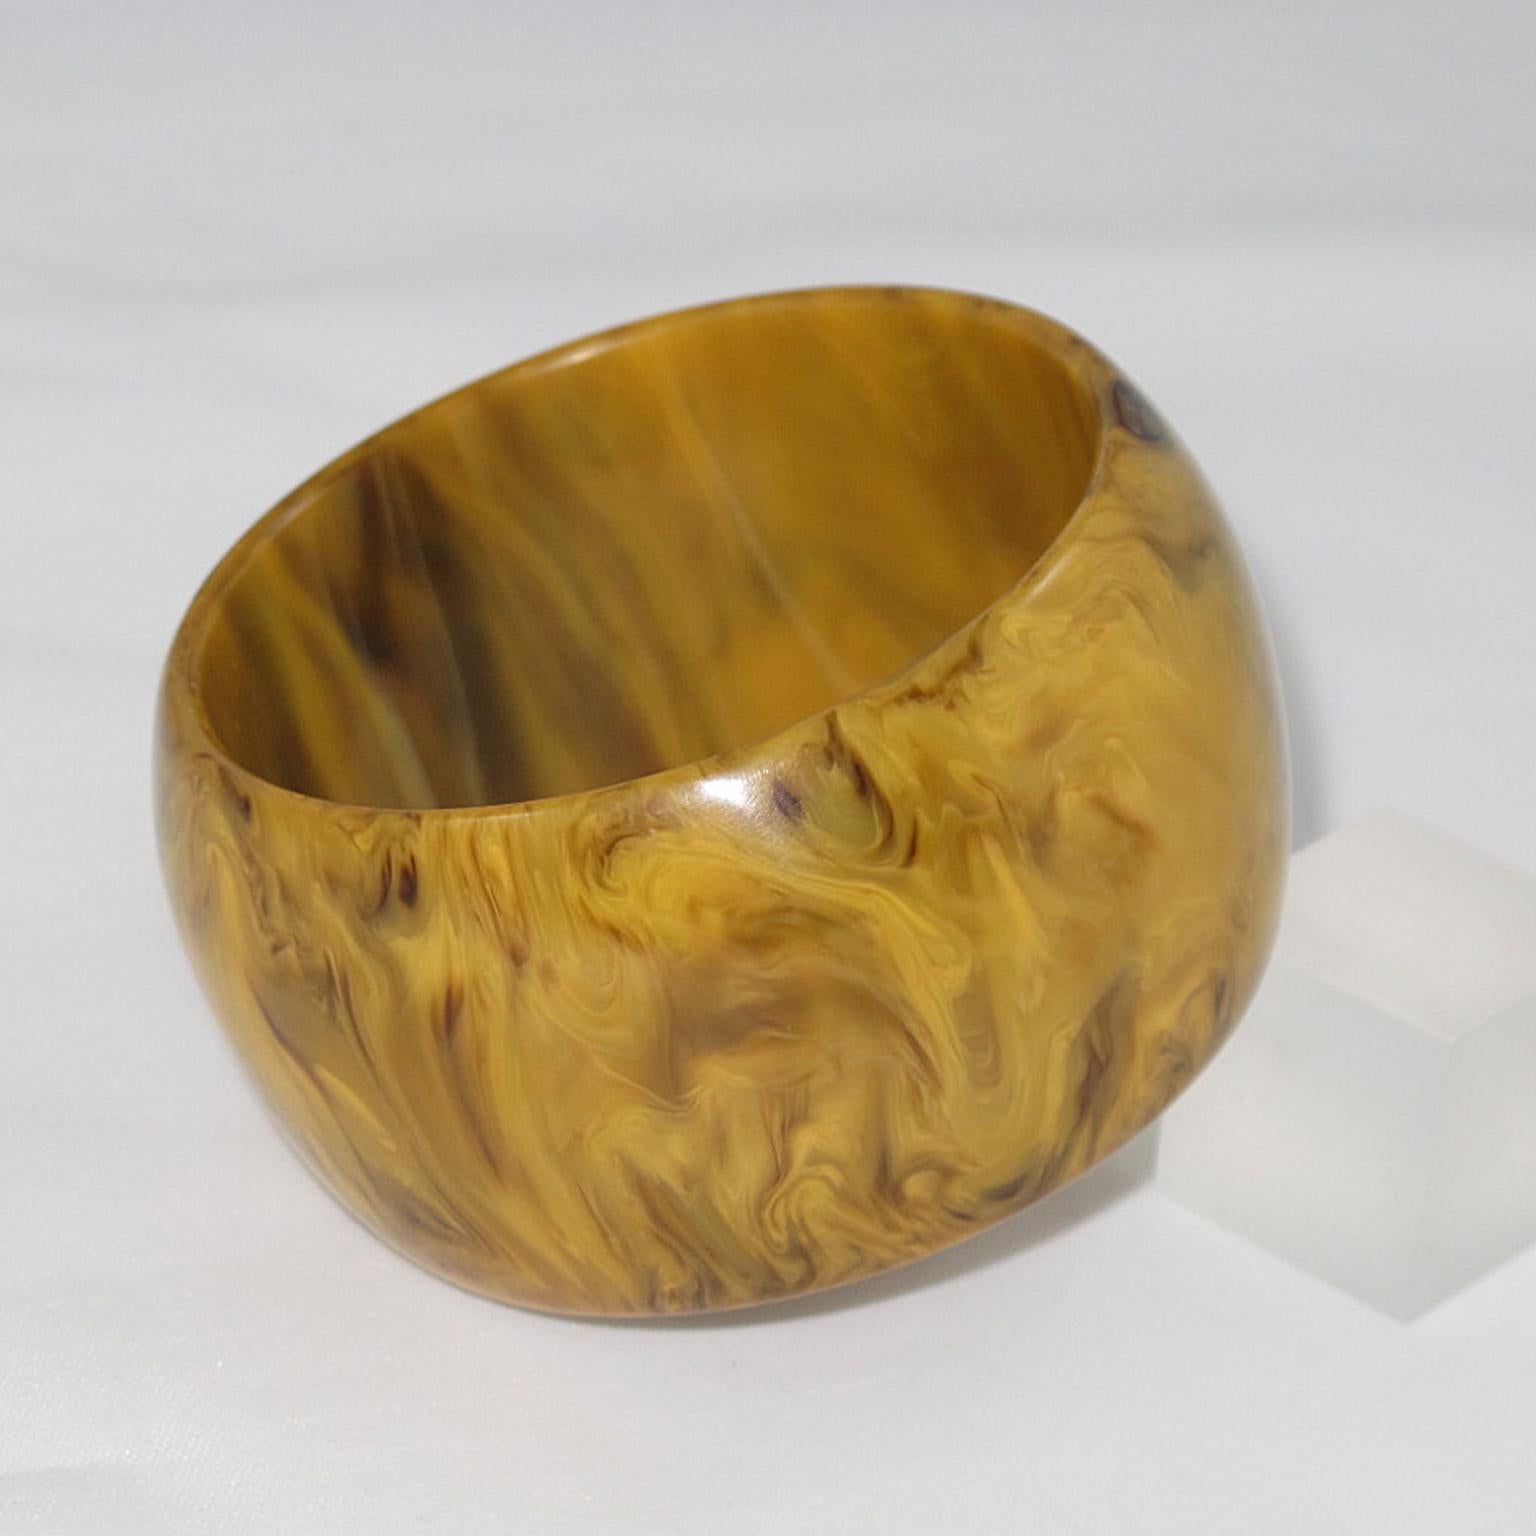 Handsome butterscotch and black marble Bakelite bracelet bangle. Oversized wide domed shape. Intense butterscotch color with black cloudy swirling also called Mississippi mud or swamp color. 
Measurements: Inside across is 2.63 in. diameter (6.7 cm)